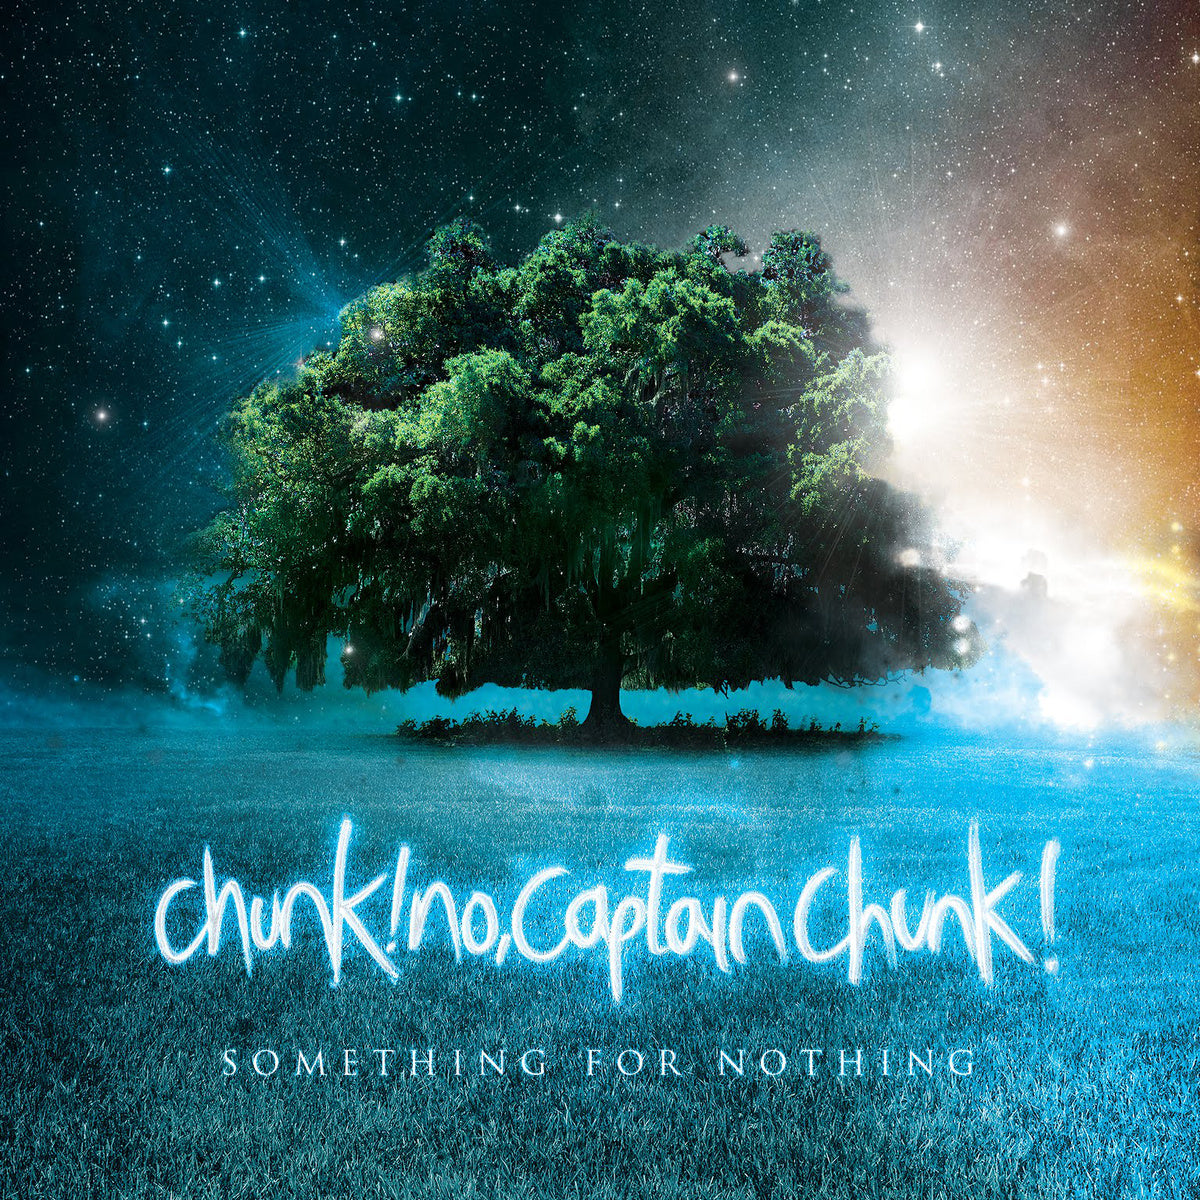 Chunk! No, Captain Chunk! "Something For Nothing" CD